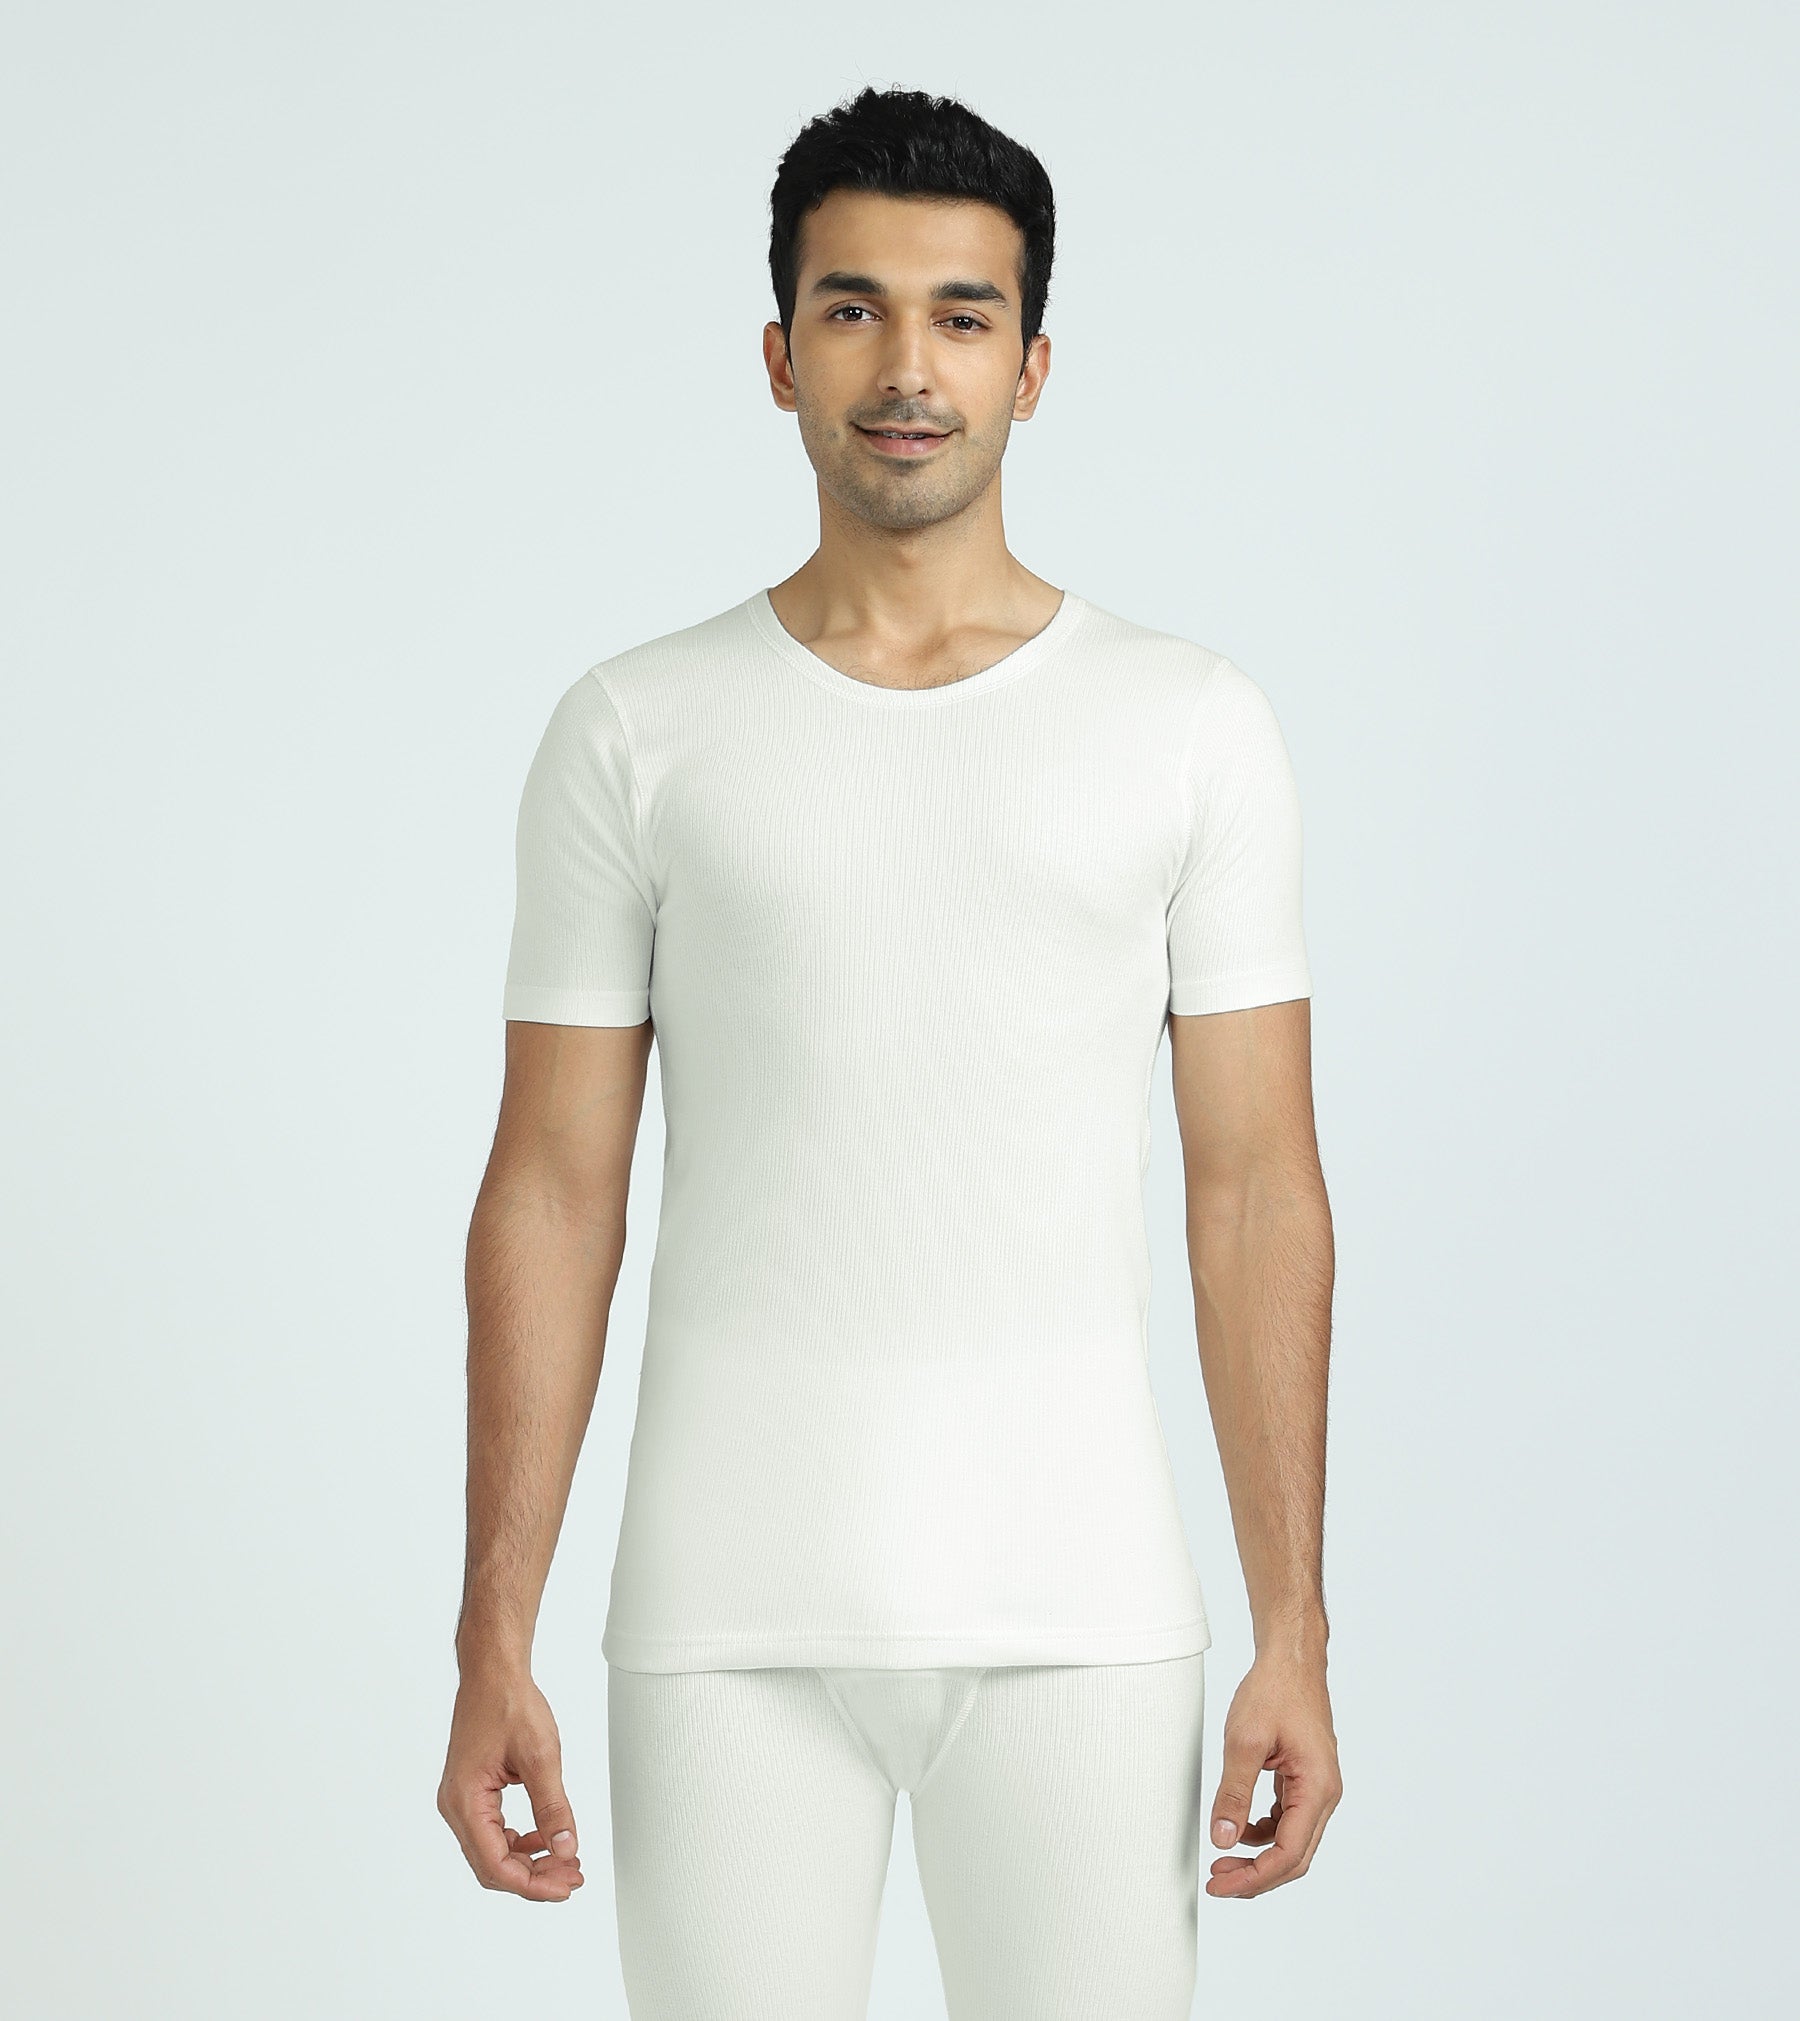 Cotton Rich Thermal Long Johns Ivory White – XYXX Apparels